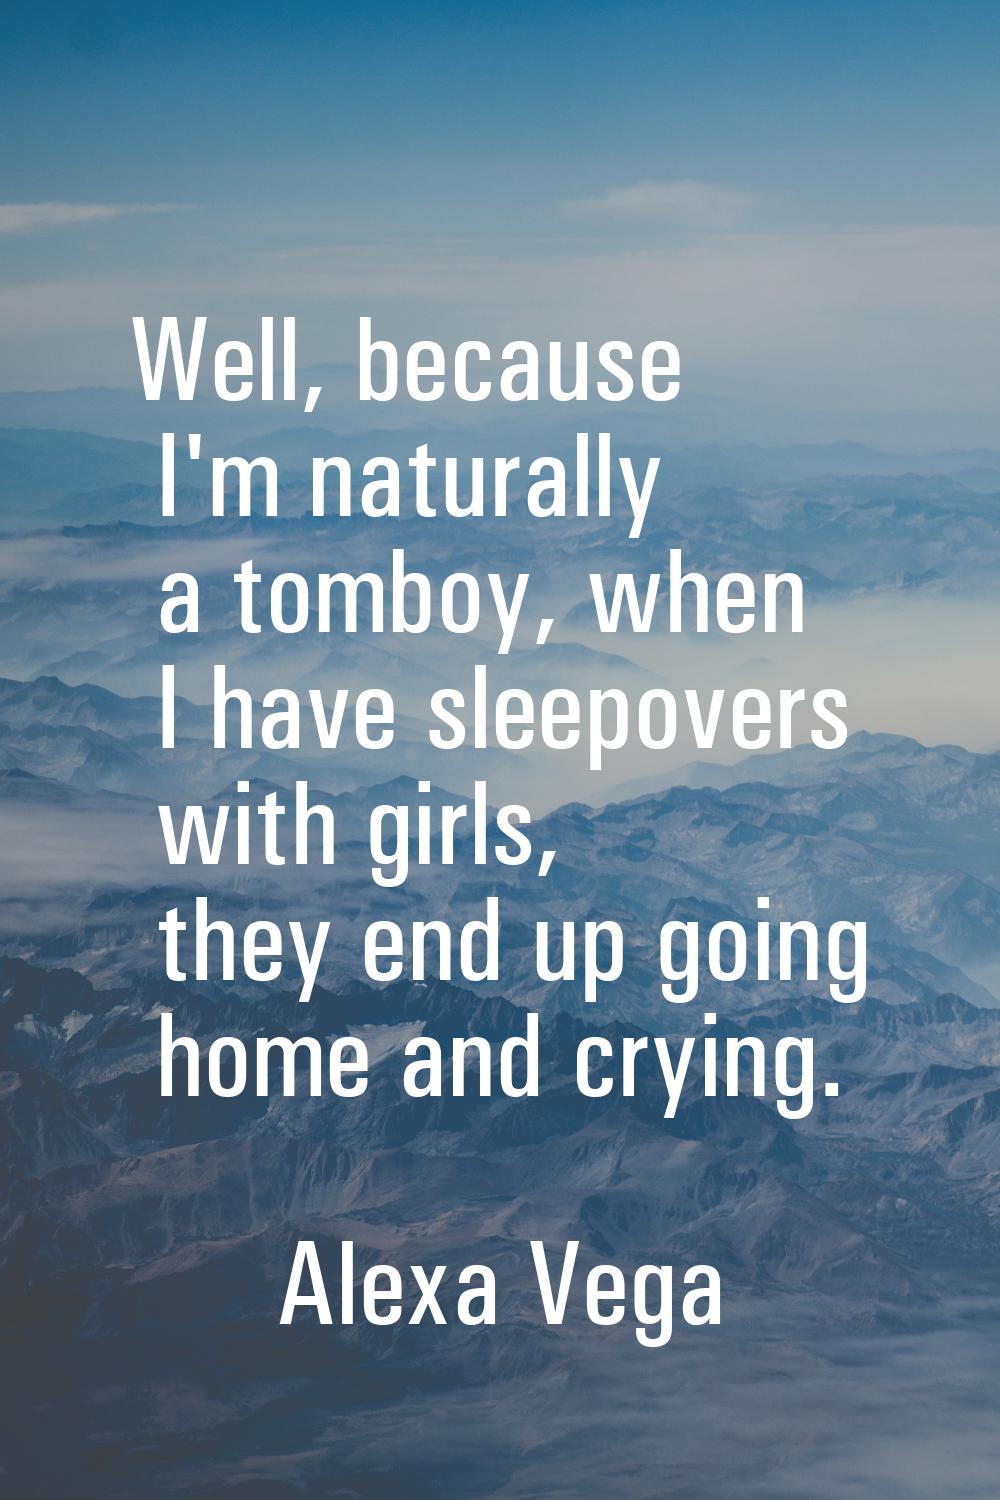 Well, because I'm naturally a tomboy, when I have sleepovers with girls, they end up going home and